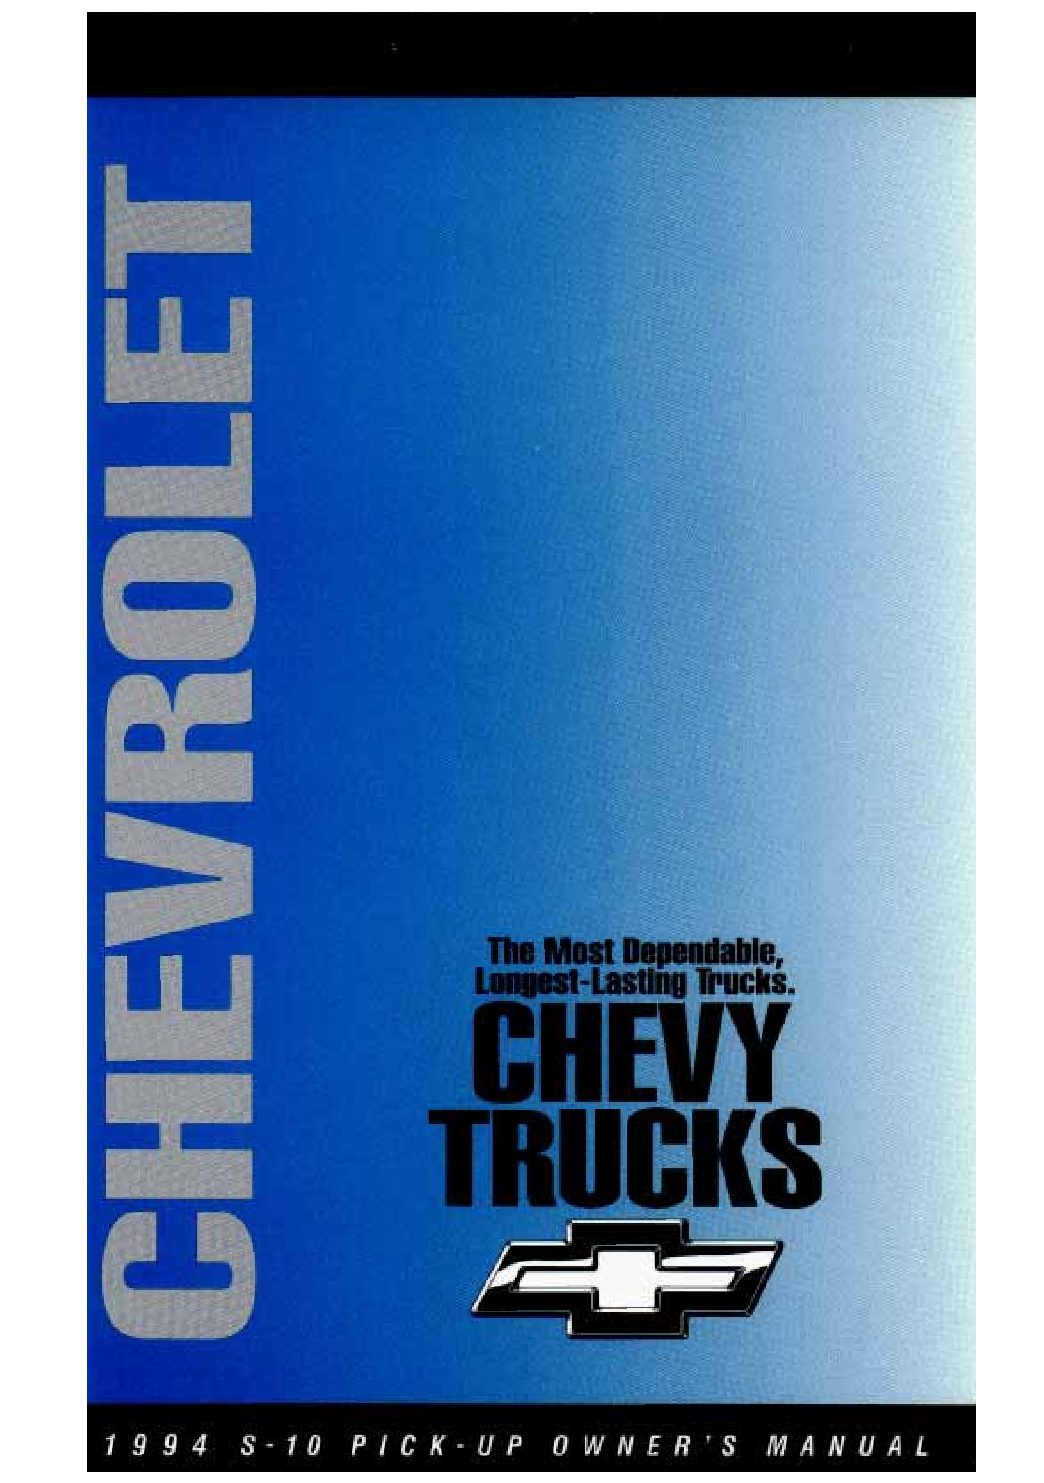 1994 Chevrolet S10 Owner’s Manual Image